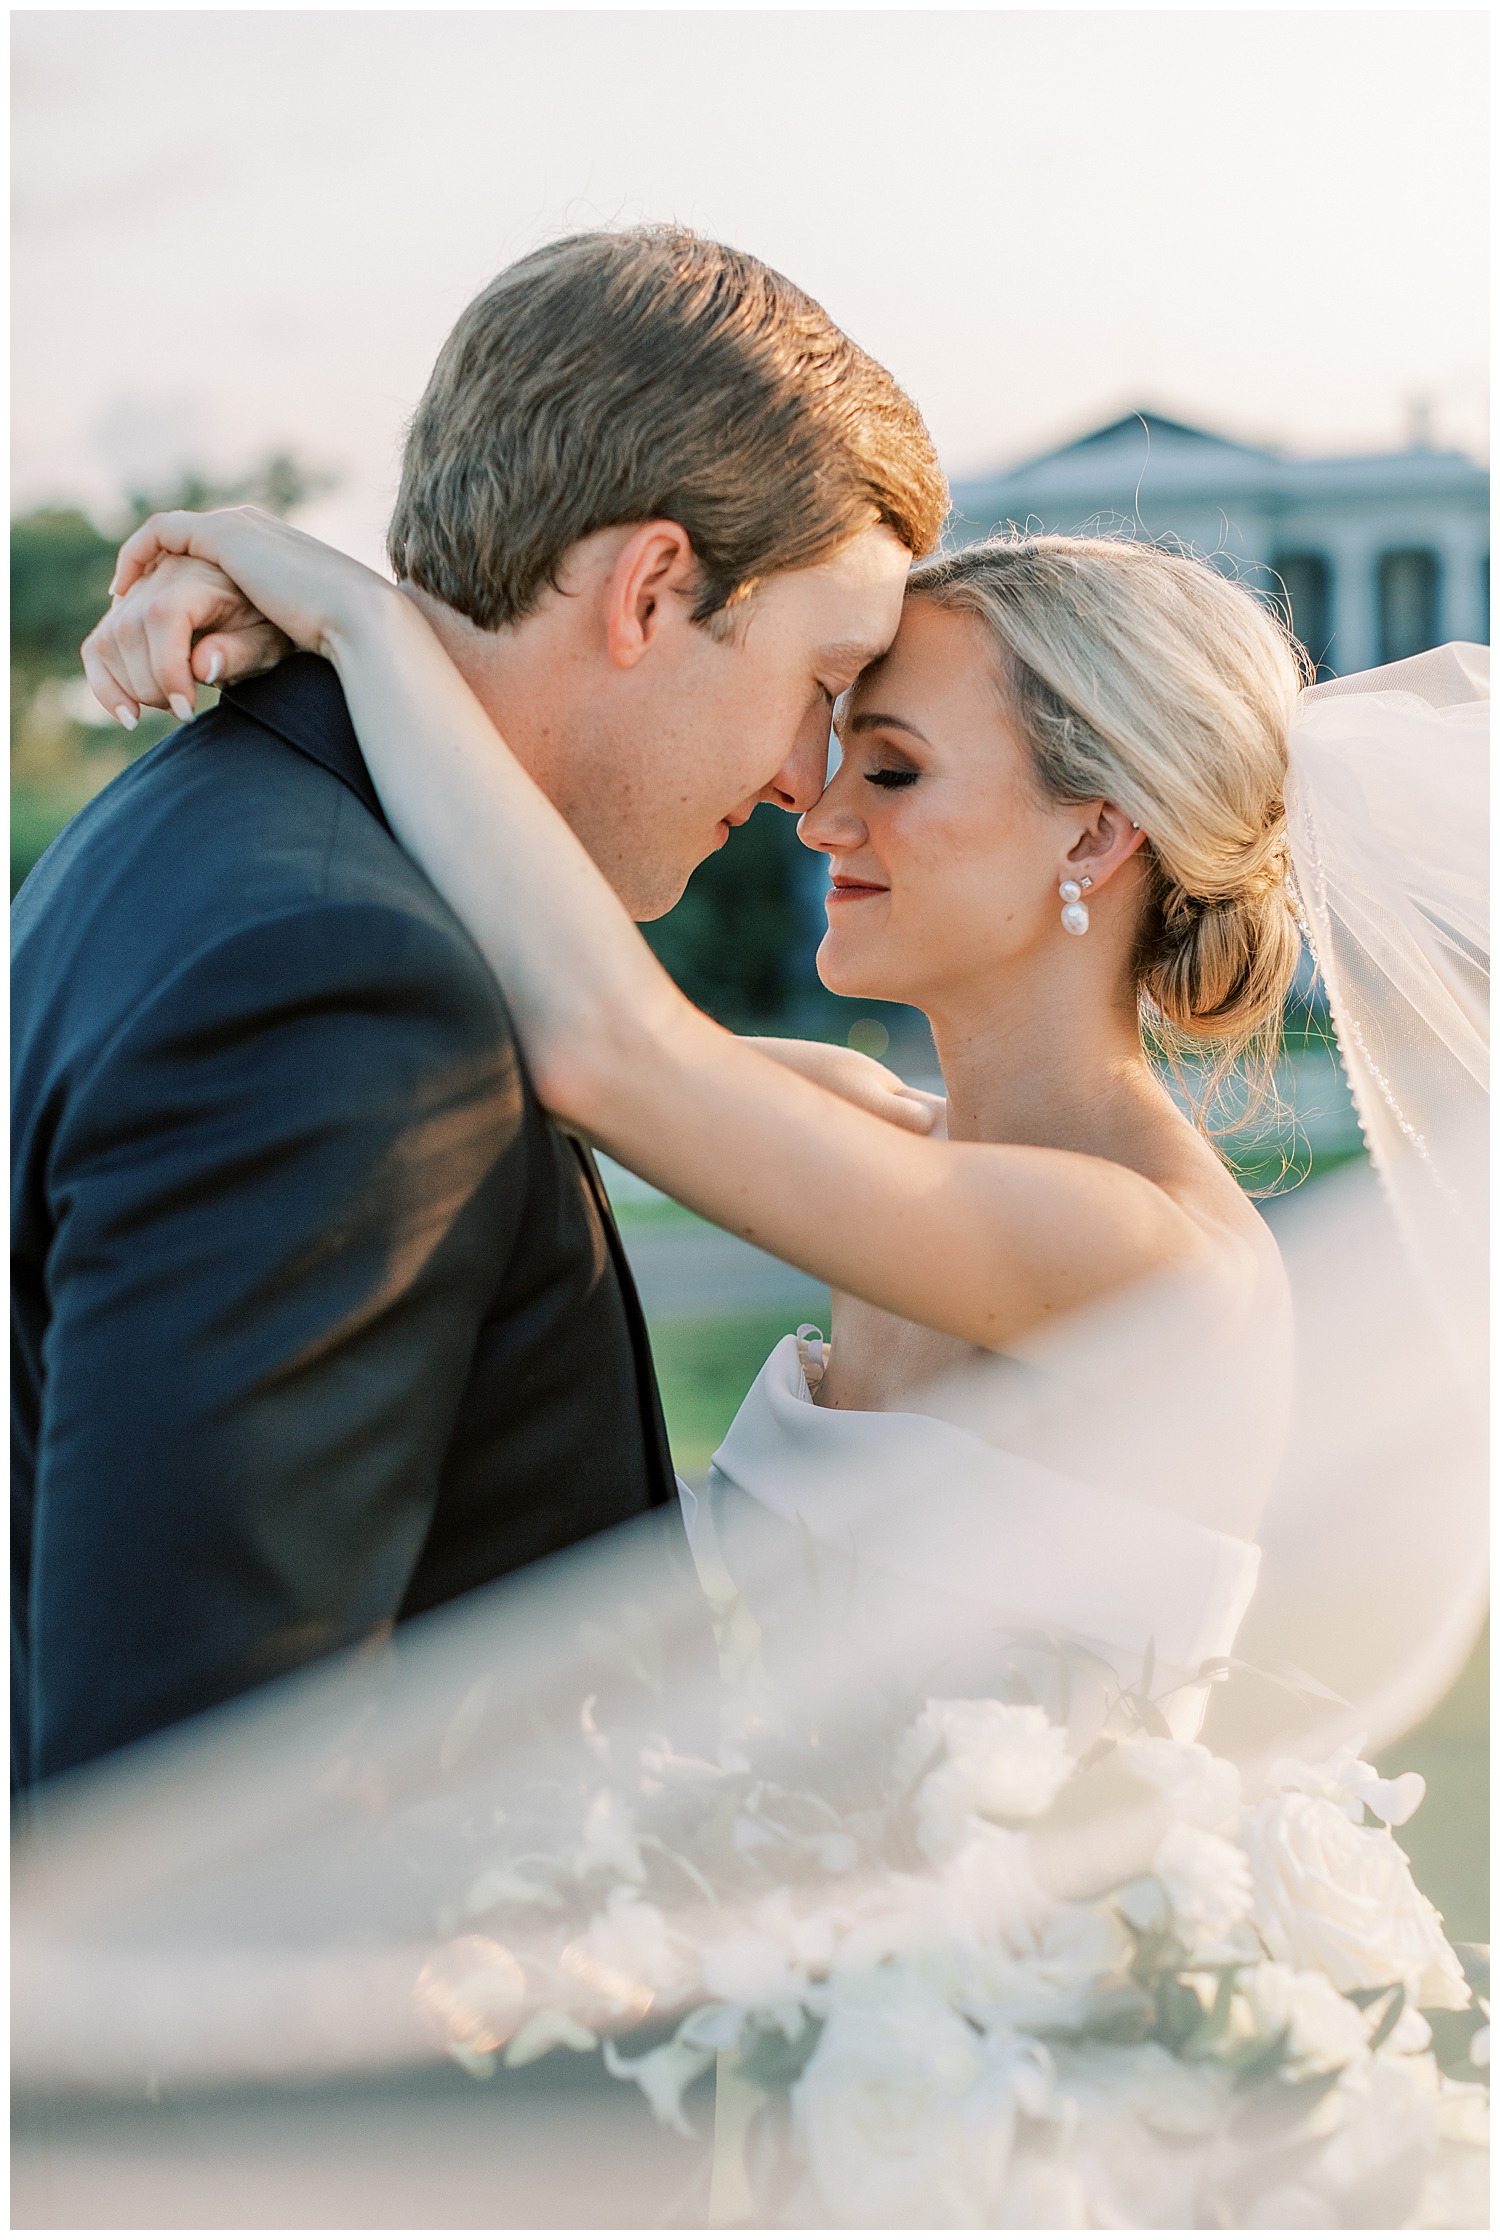 A husband and wife embrace each other with the veil swooping before them.